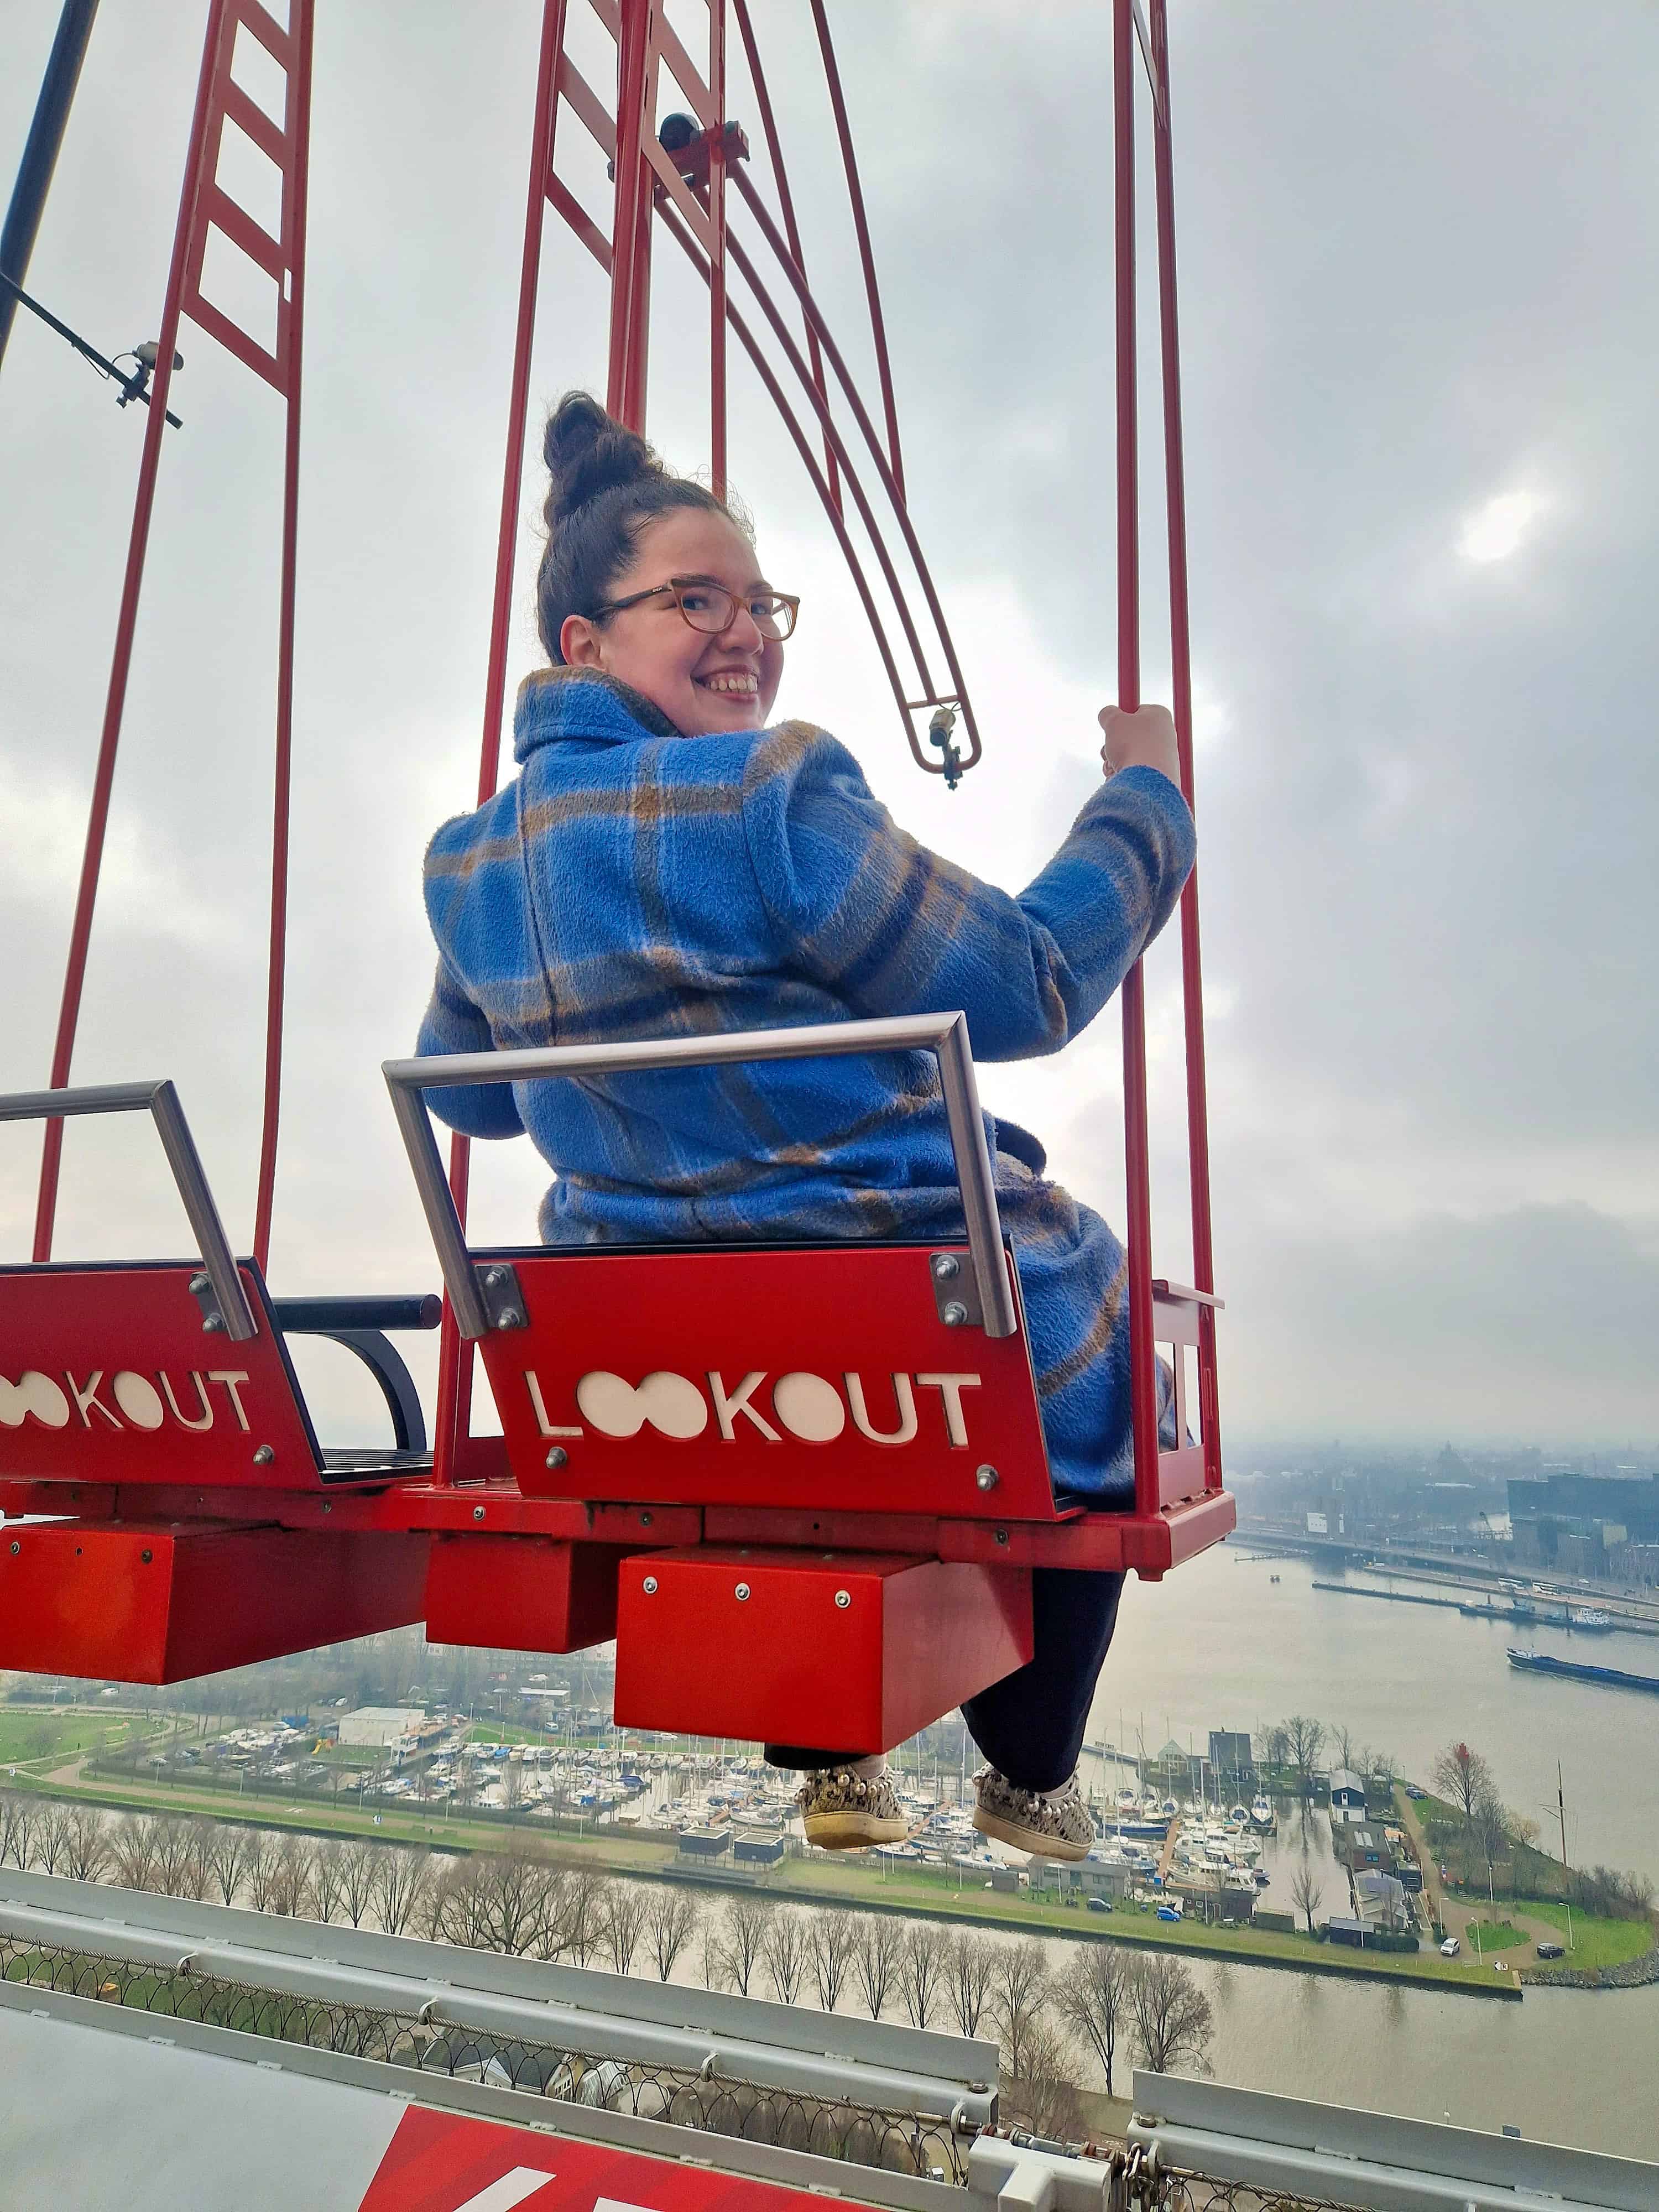 me on a swing that's 100 meters high in amsterdam